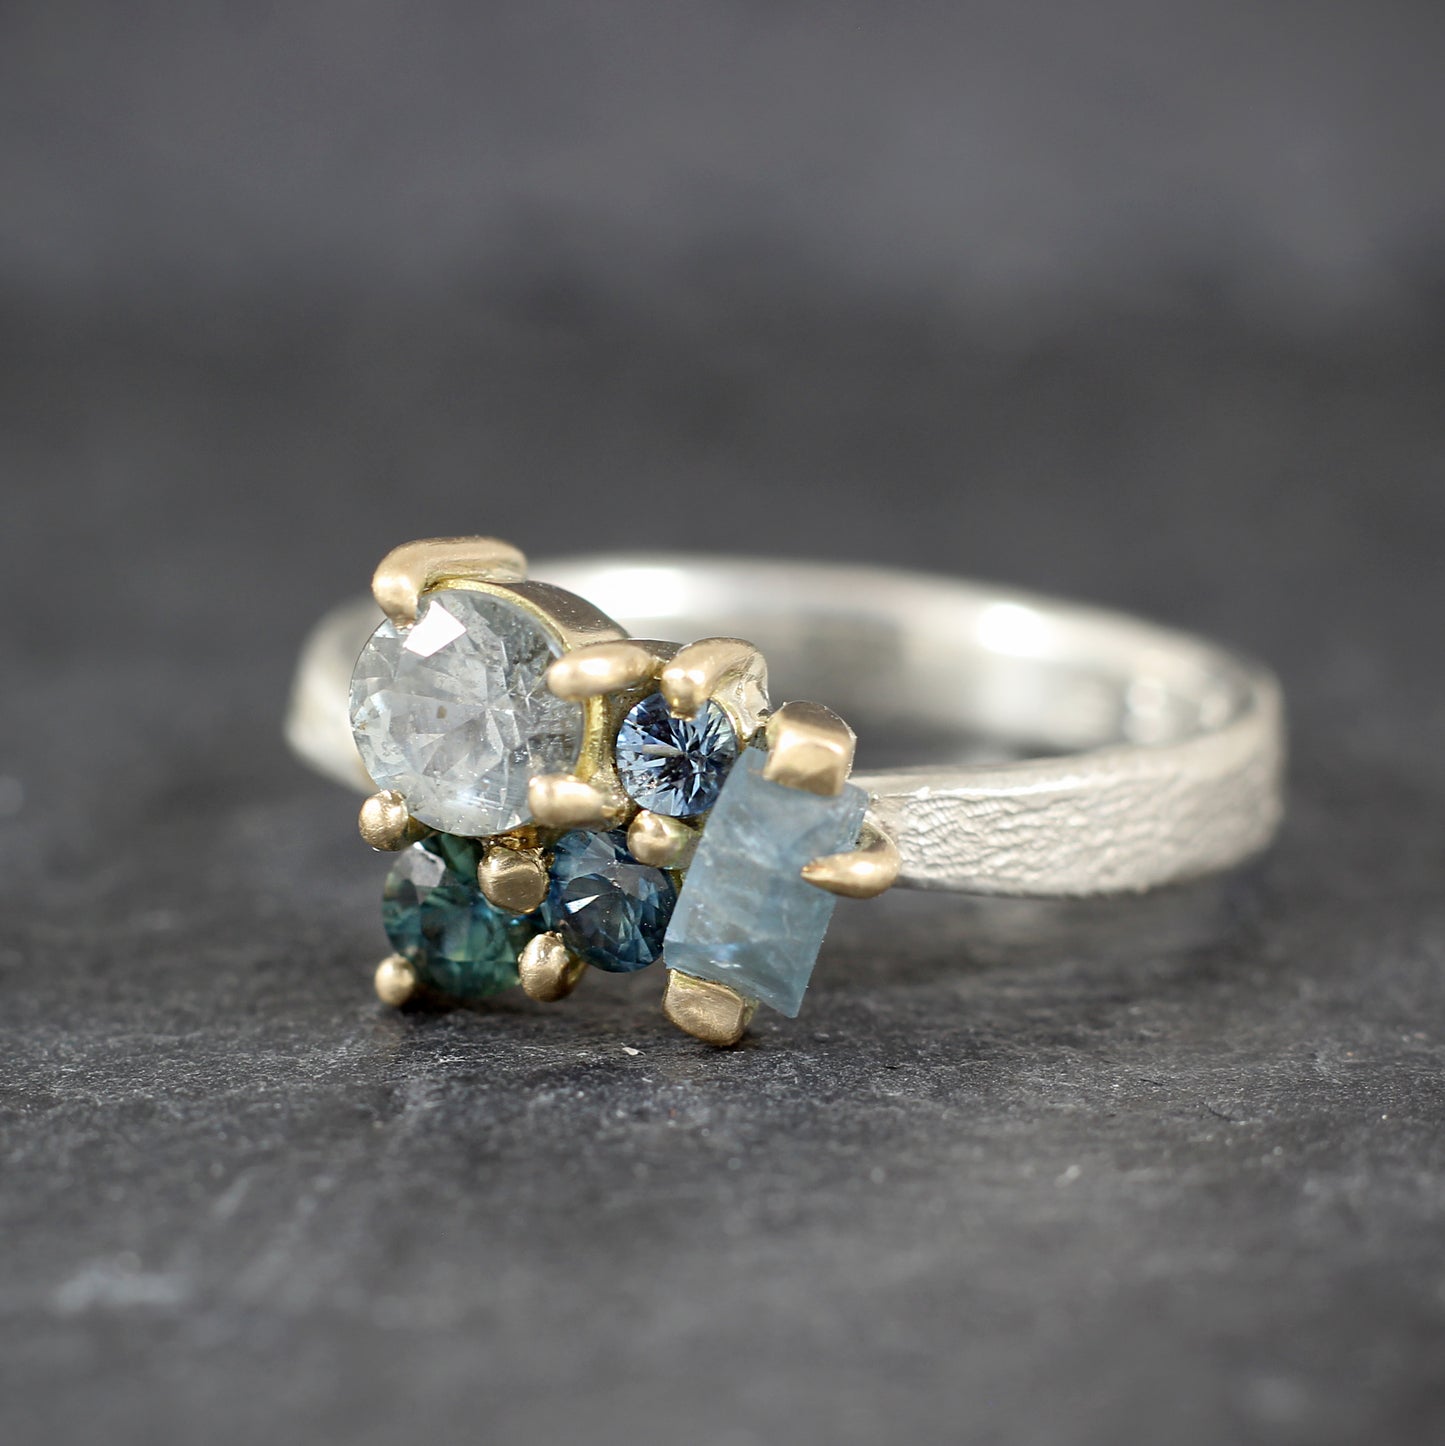 The Cassy Ring - Aquamarine and sapphire cluster ring in textured gold and silver